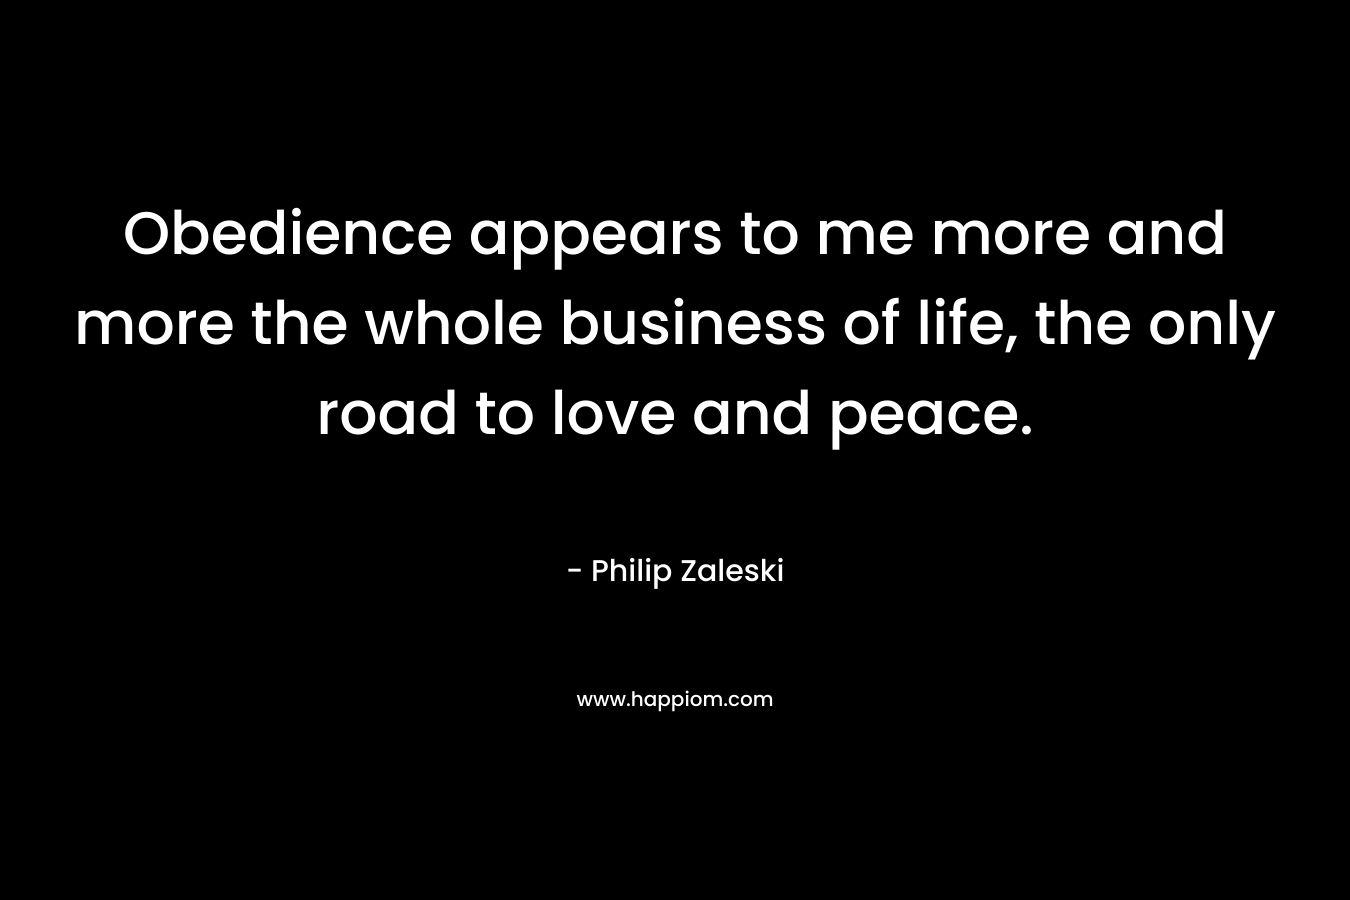 Obedience appears to me more and more the whole business of life, the only road to love and peace.